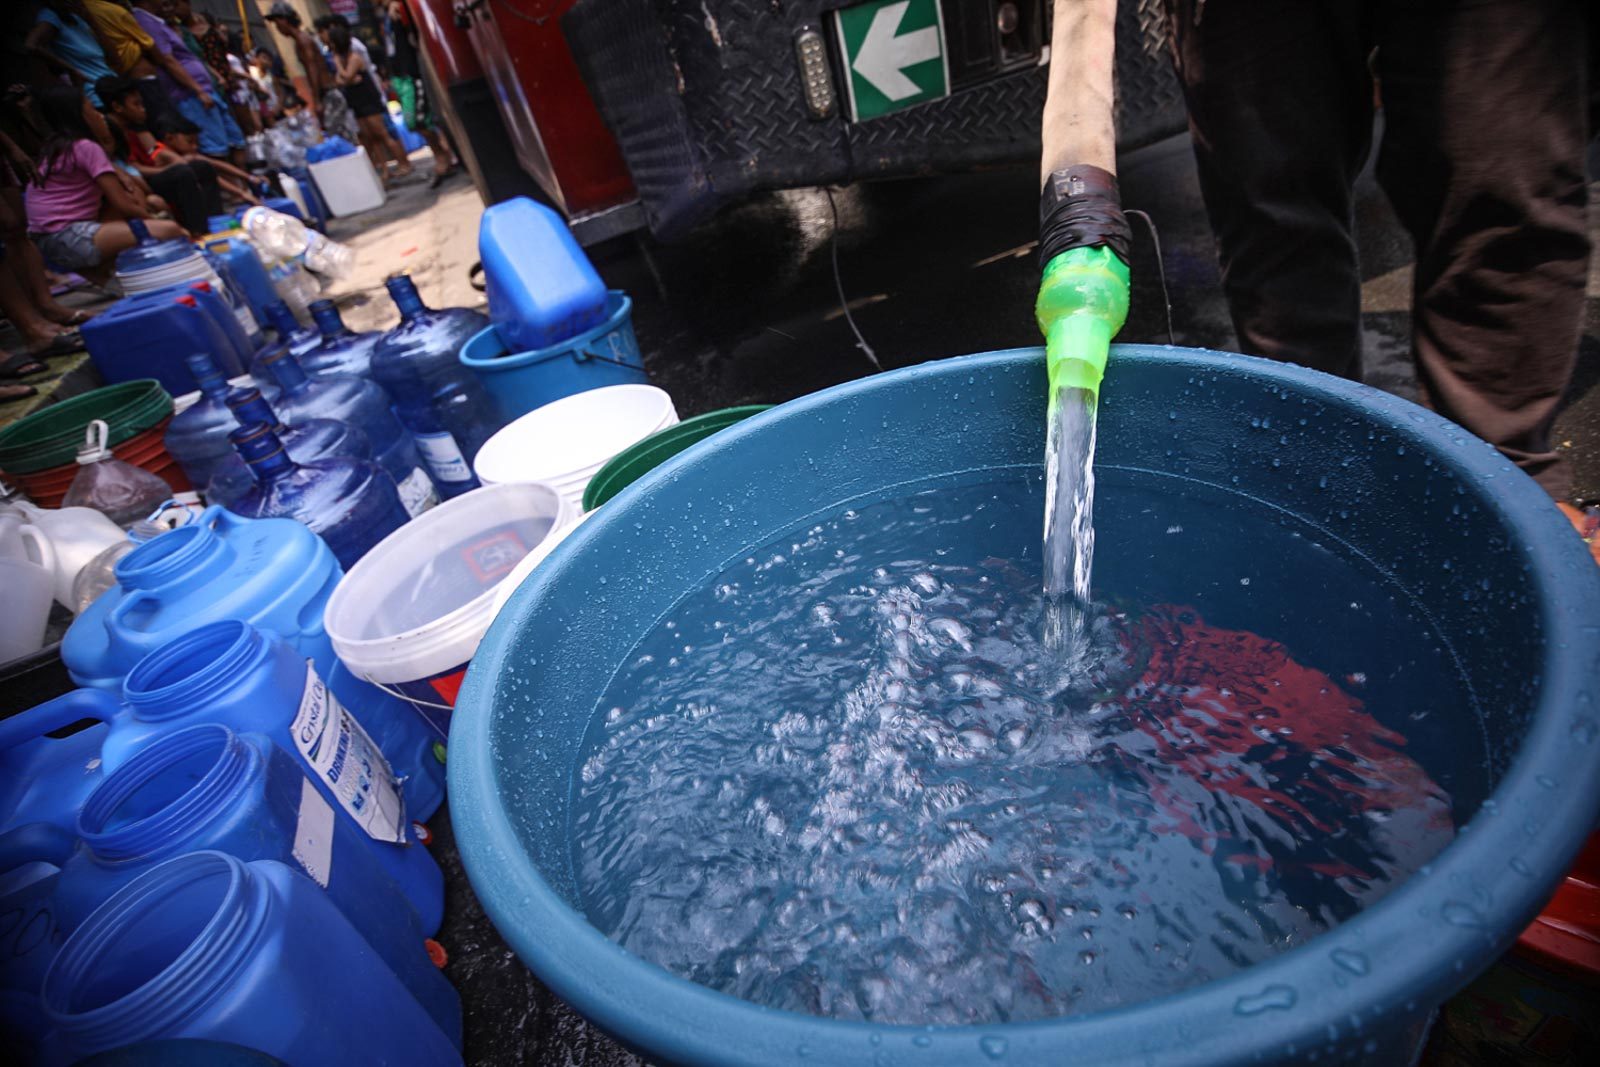 Maynilad, Manila Water will no longer demand payment from gov’t